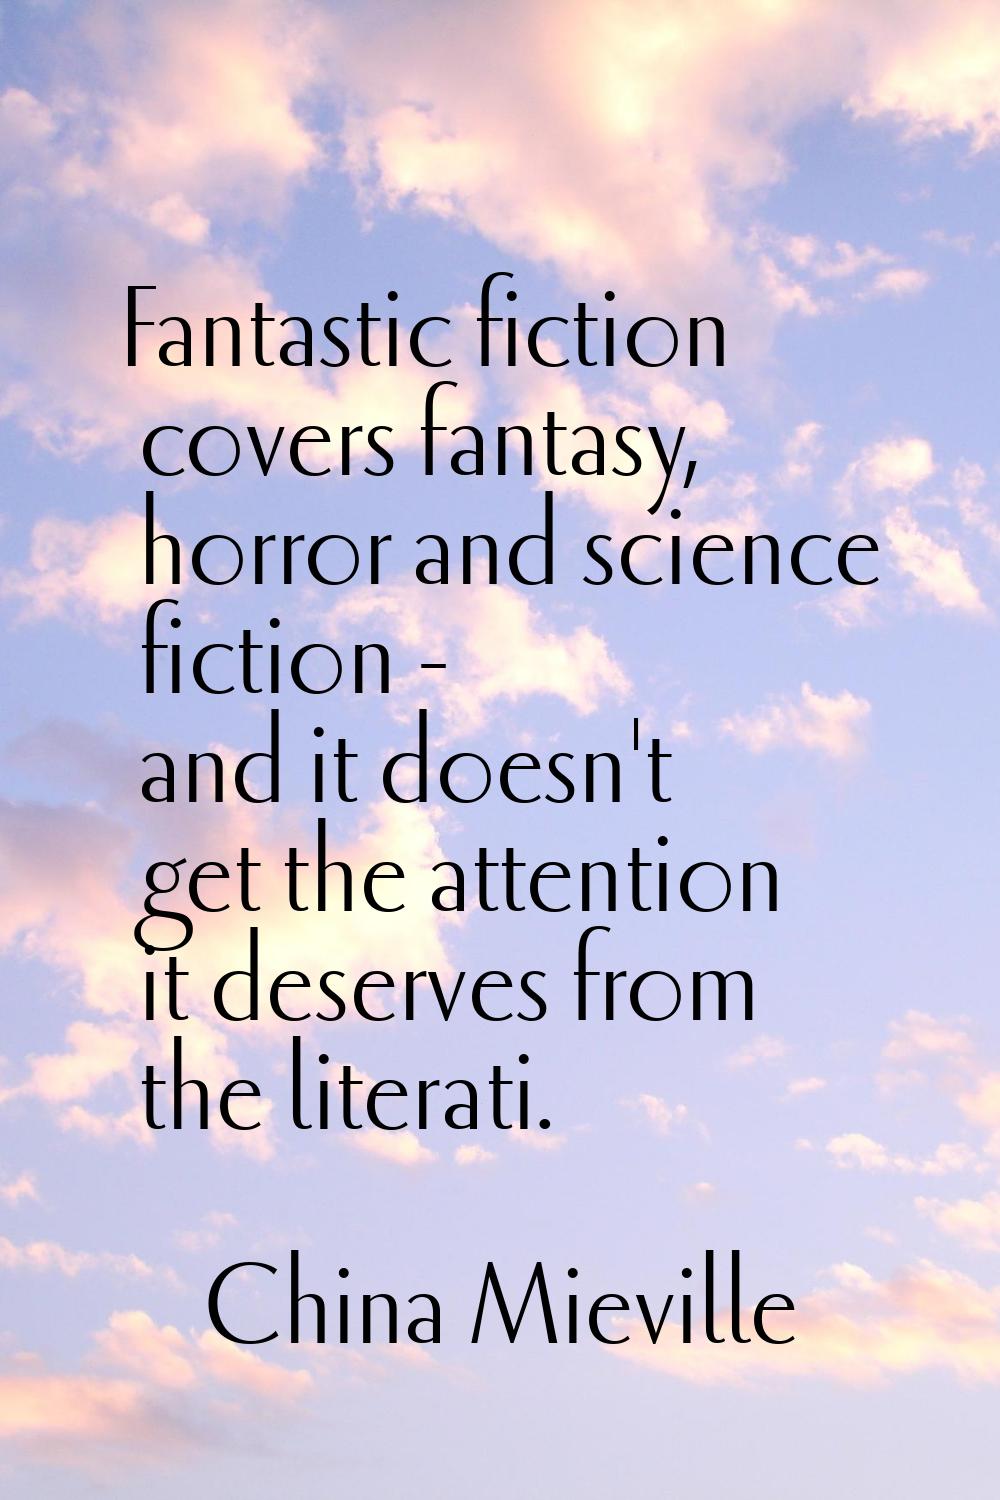 Fantastic fiction covers fantasy, horror and science fiction - and it doesn't get the attention it 